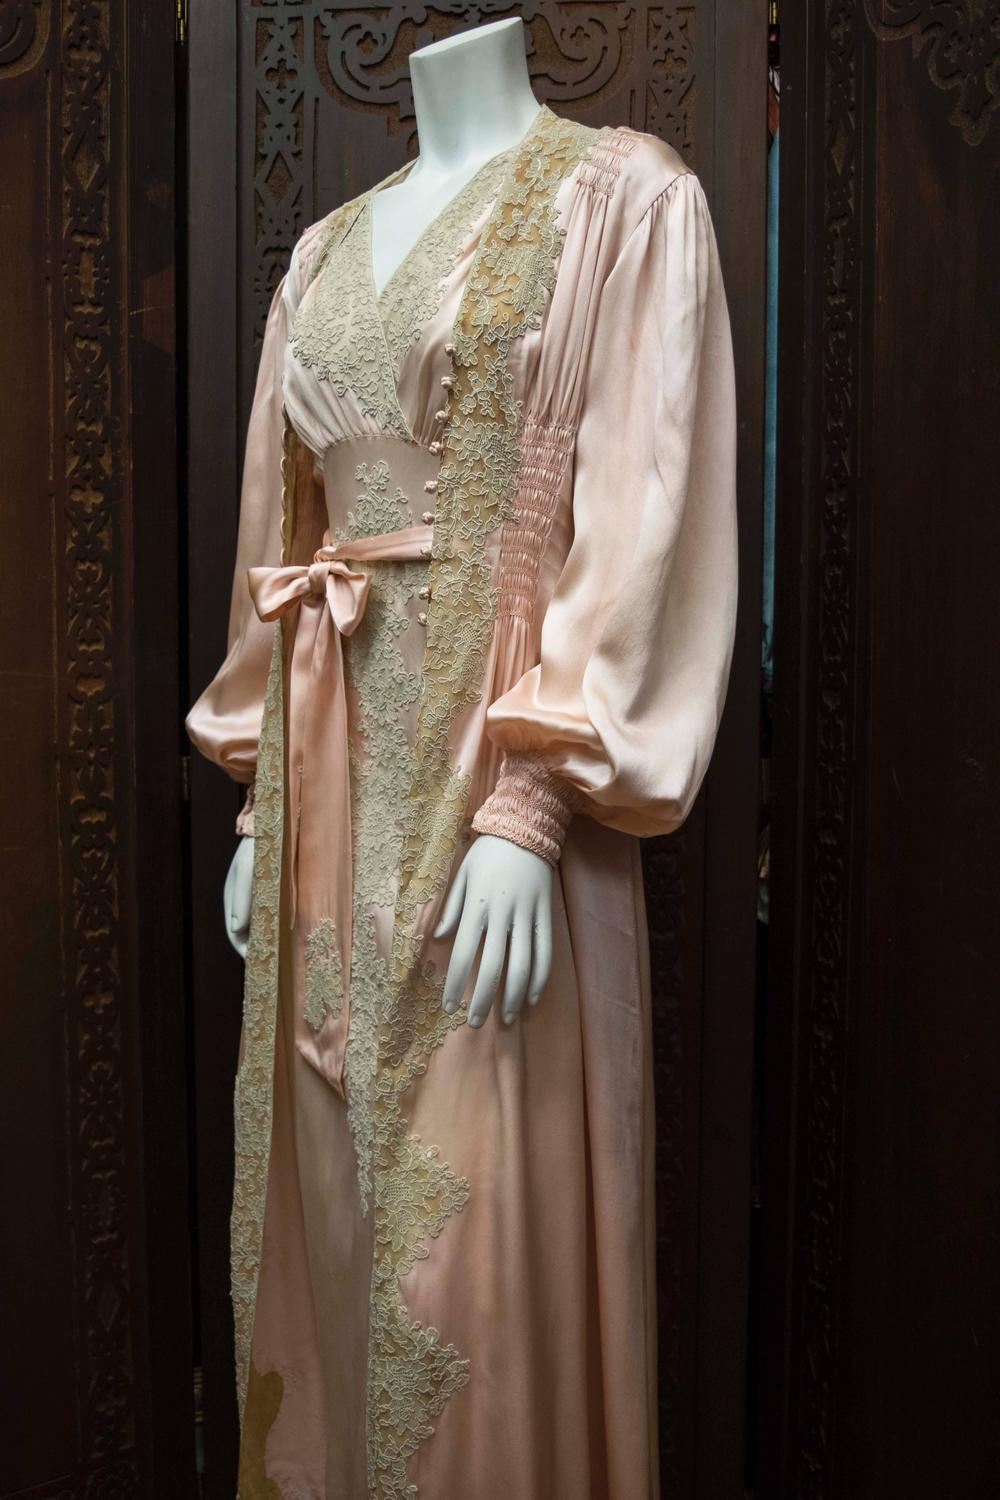 1930s Two Piece Loungewear: Gown and Robe For Sale at 1stdibs